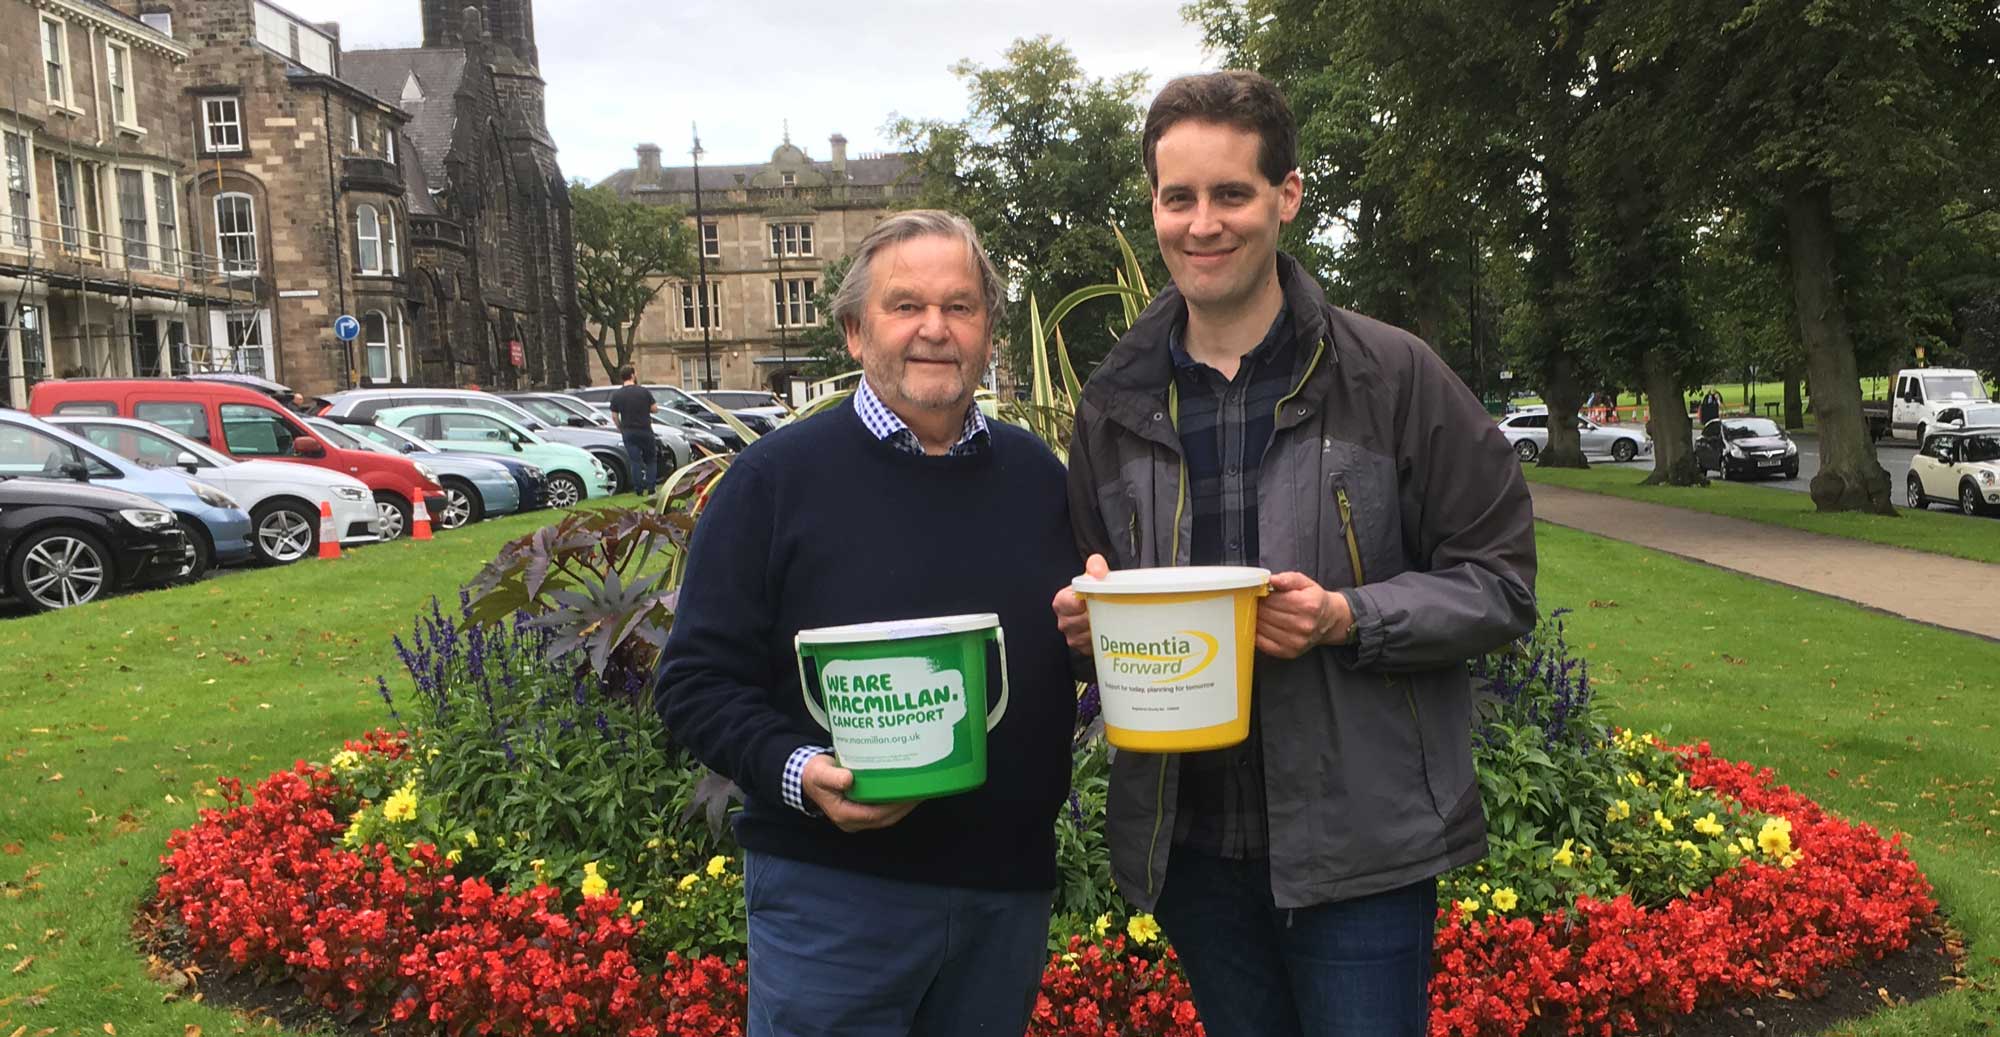 Alan Williams and Patrick Dunlop are going to walk all 109 miles of the Cleveland Way, setting off from Helmsley on Saturday 31 August and finishing in Filey on Sunday 8 September.